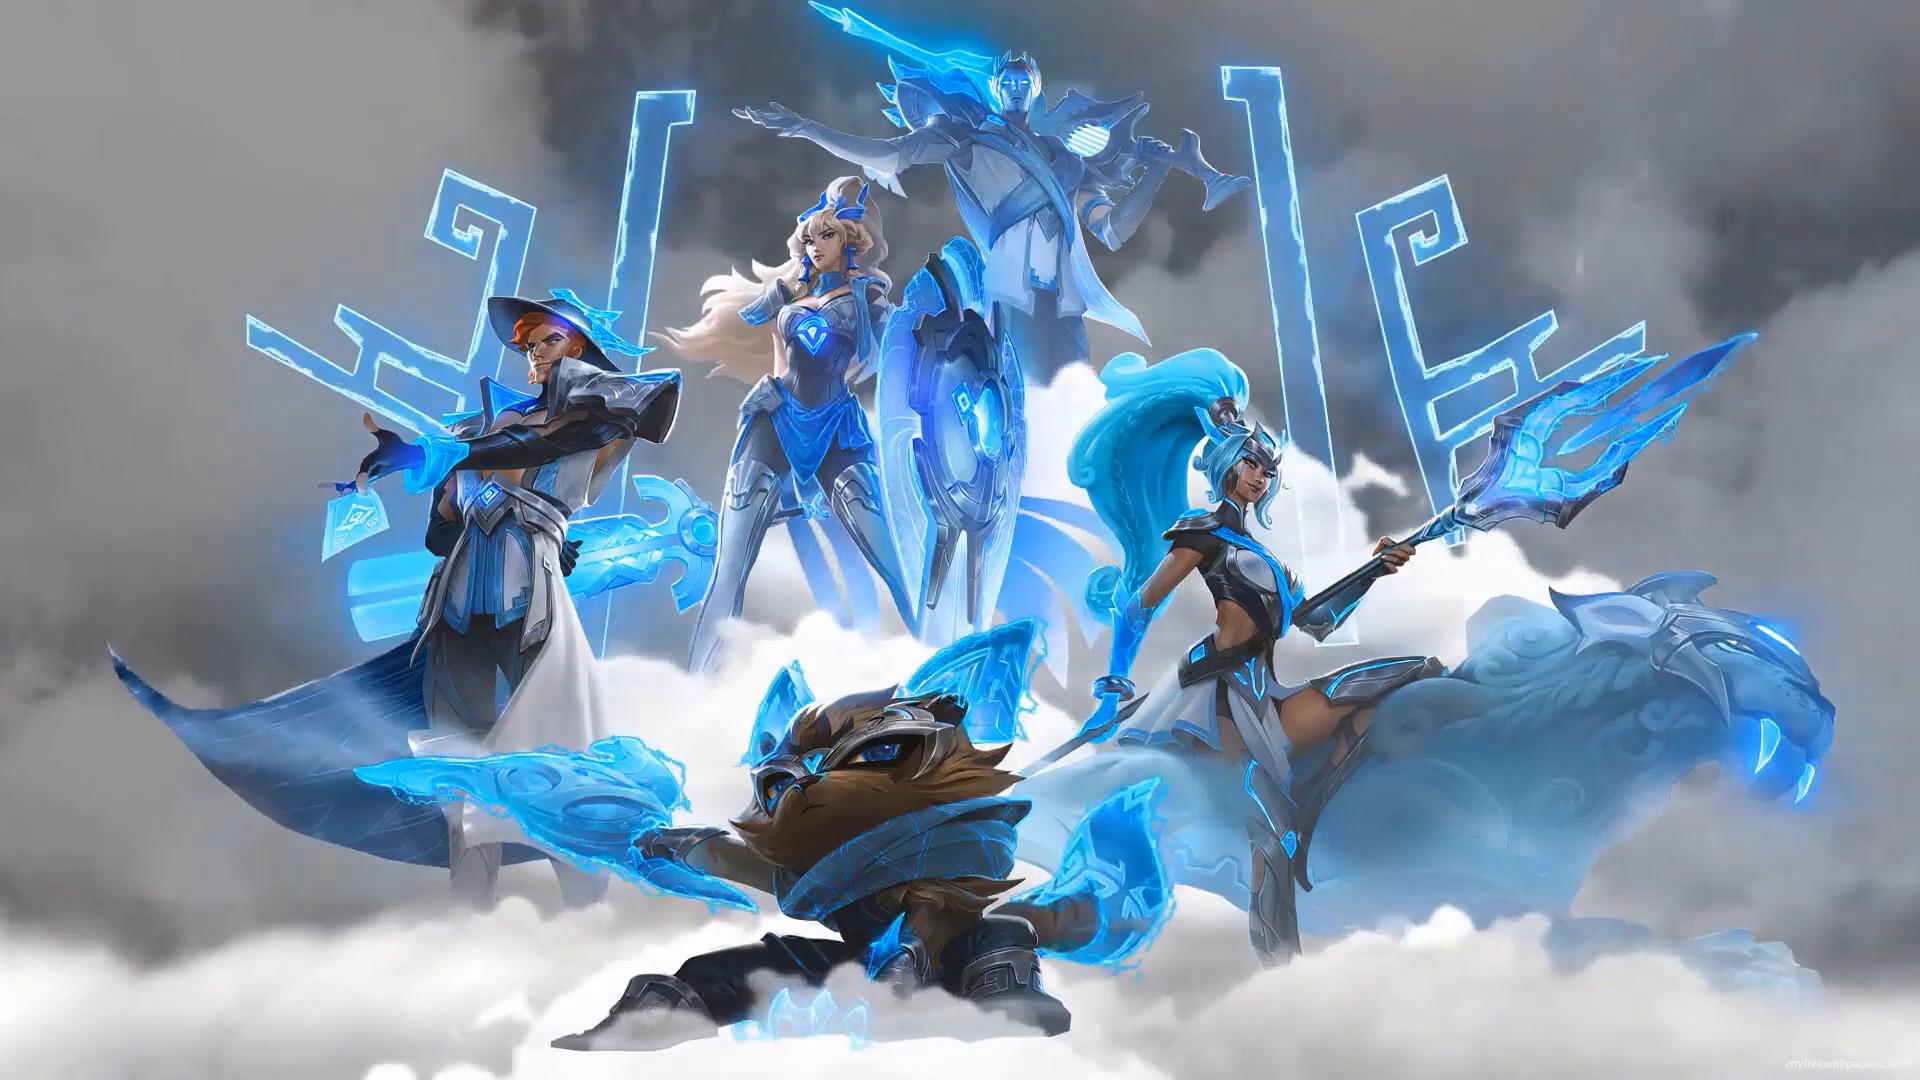 Live wallpaper Pike from the League of Legends game / interface  personalization